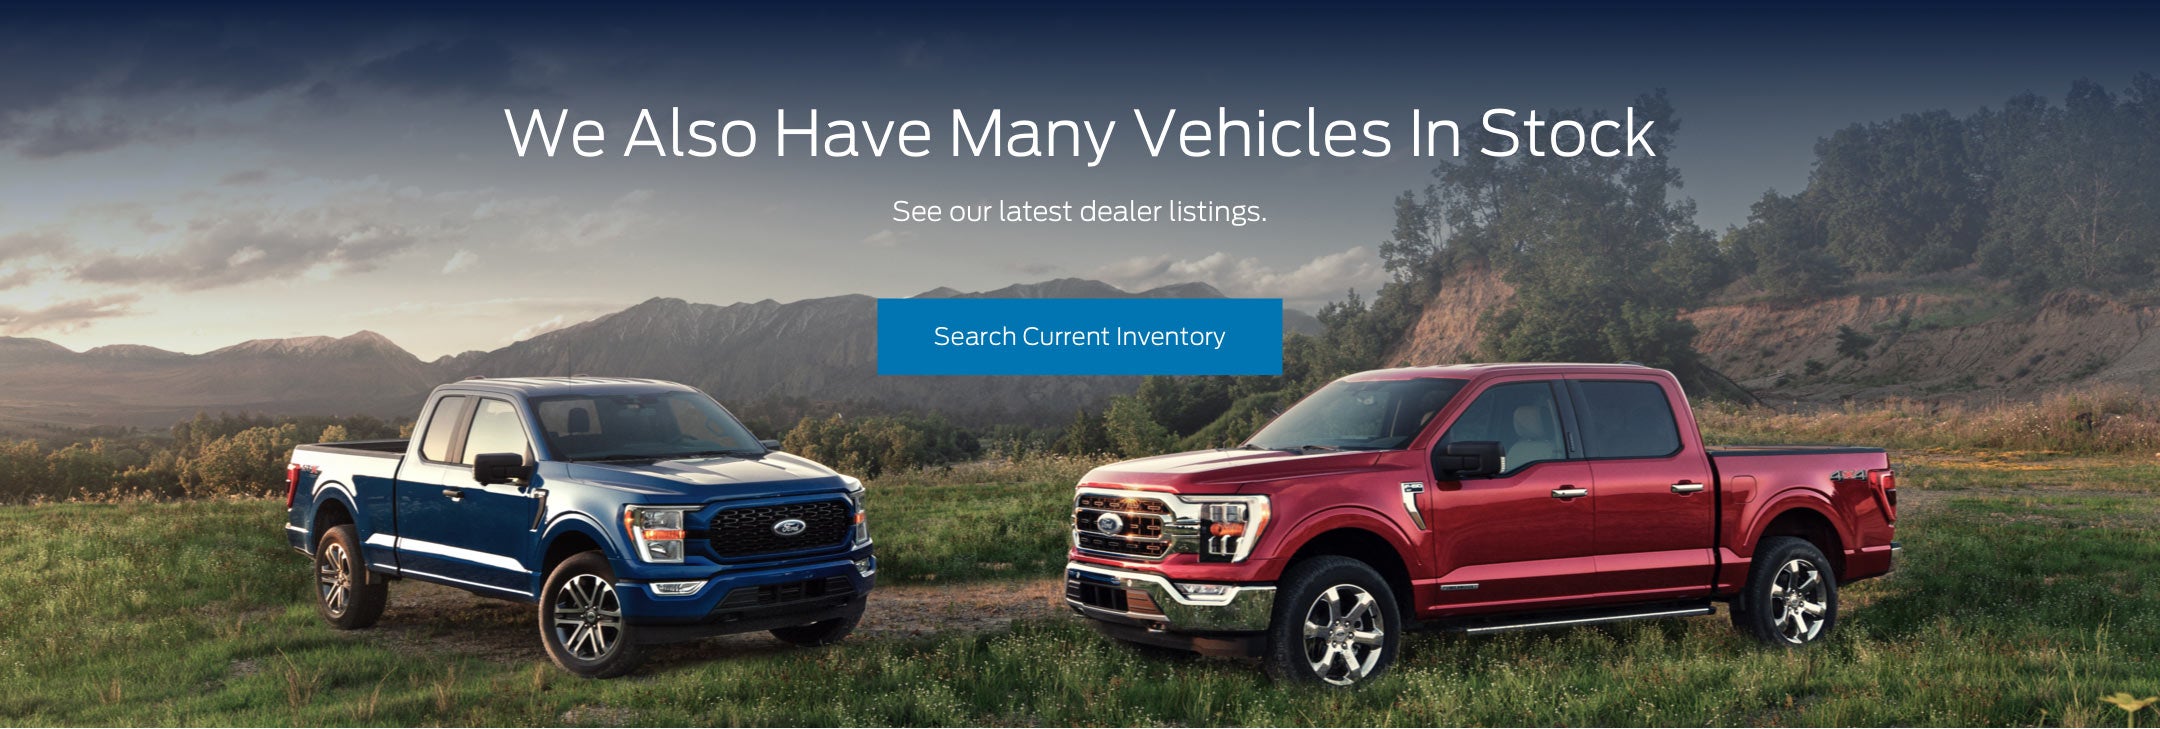 Ford vehicles in stock | New Brighton Ford, Inc. in New Brighton MN